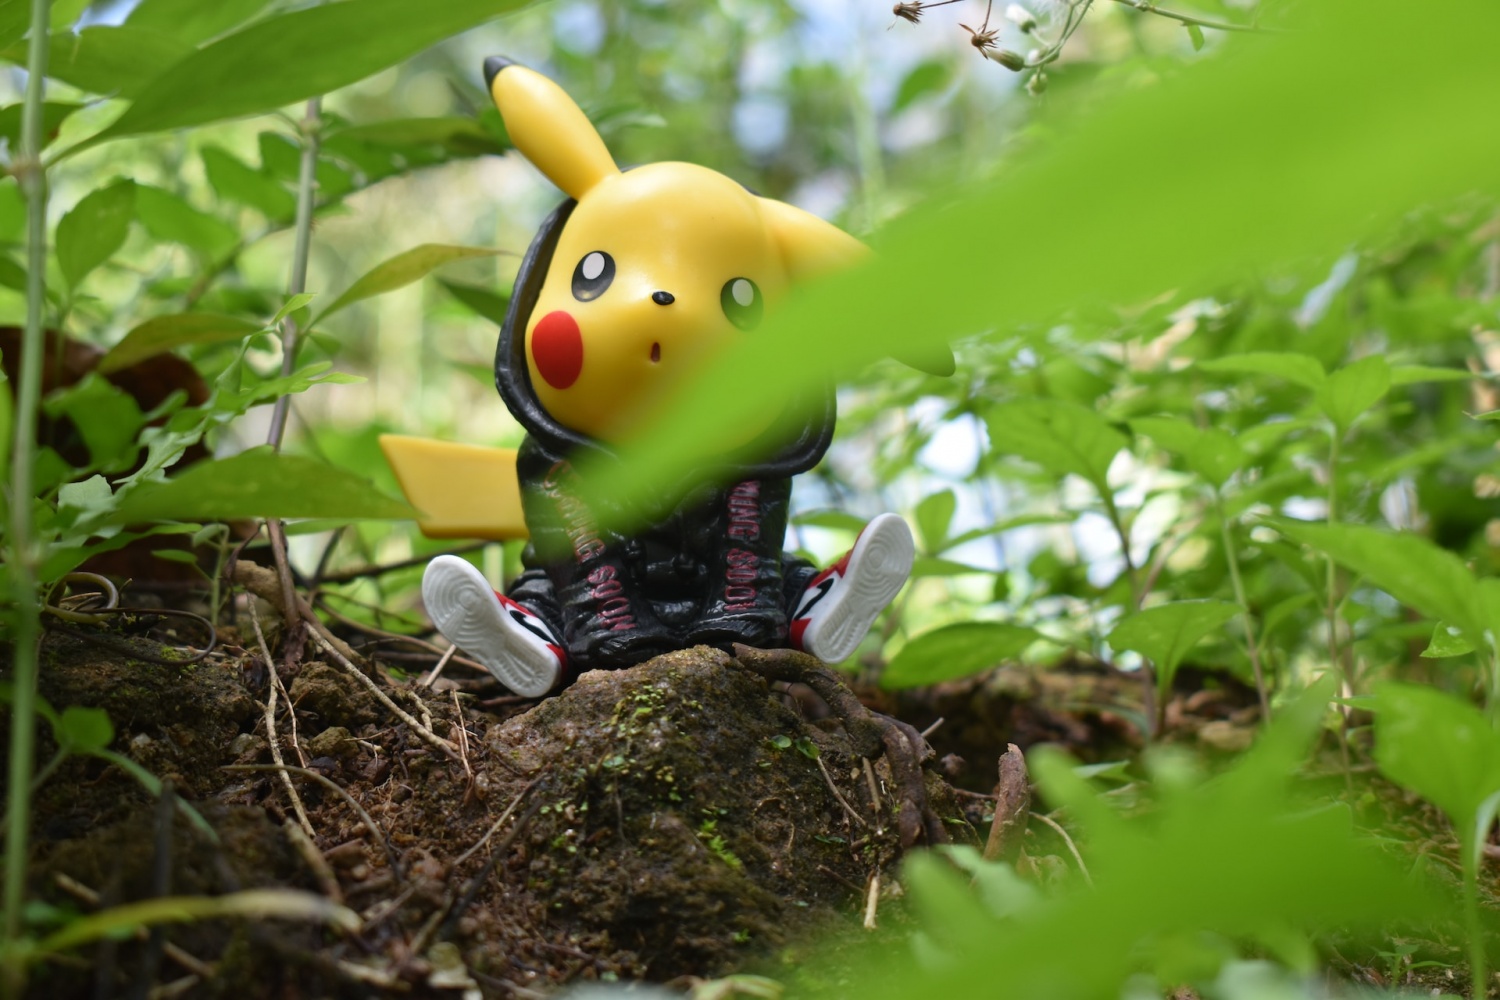 Pokemon Content Creators on Instagram Now Banned: No Reason Pinpointed Yet